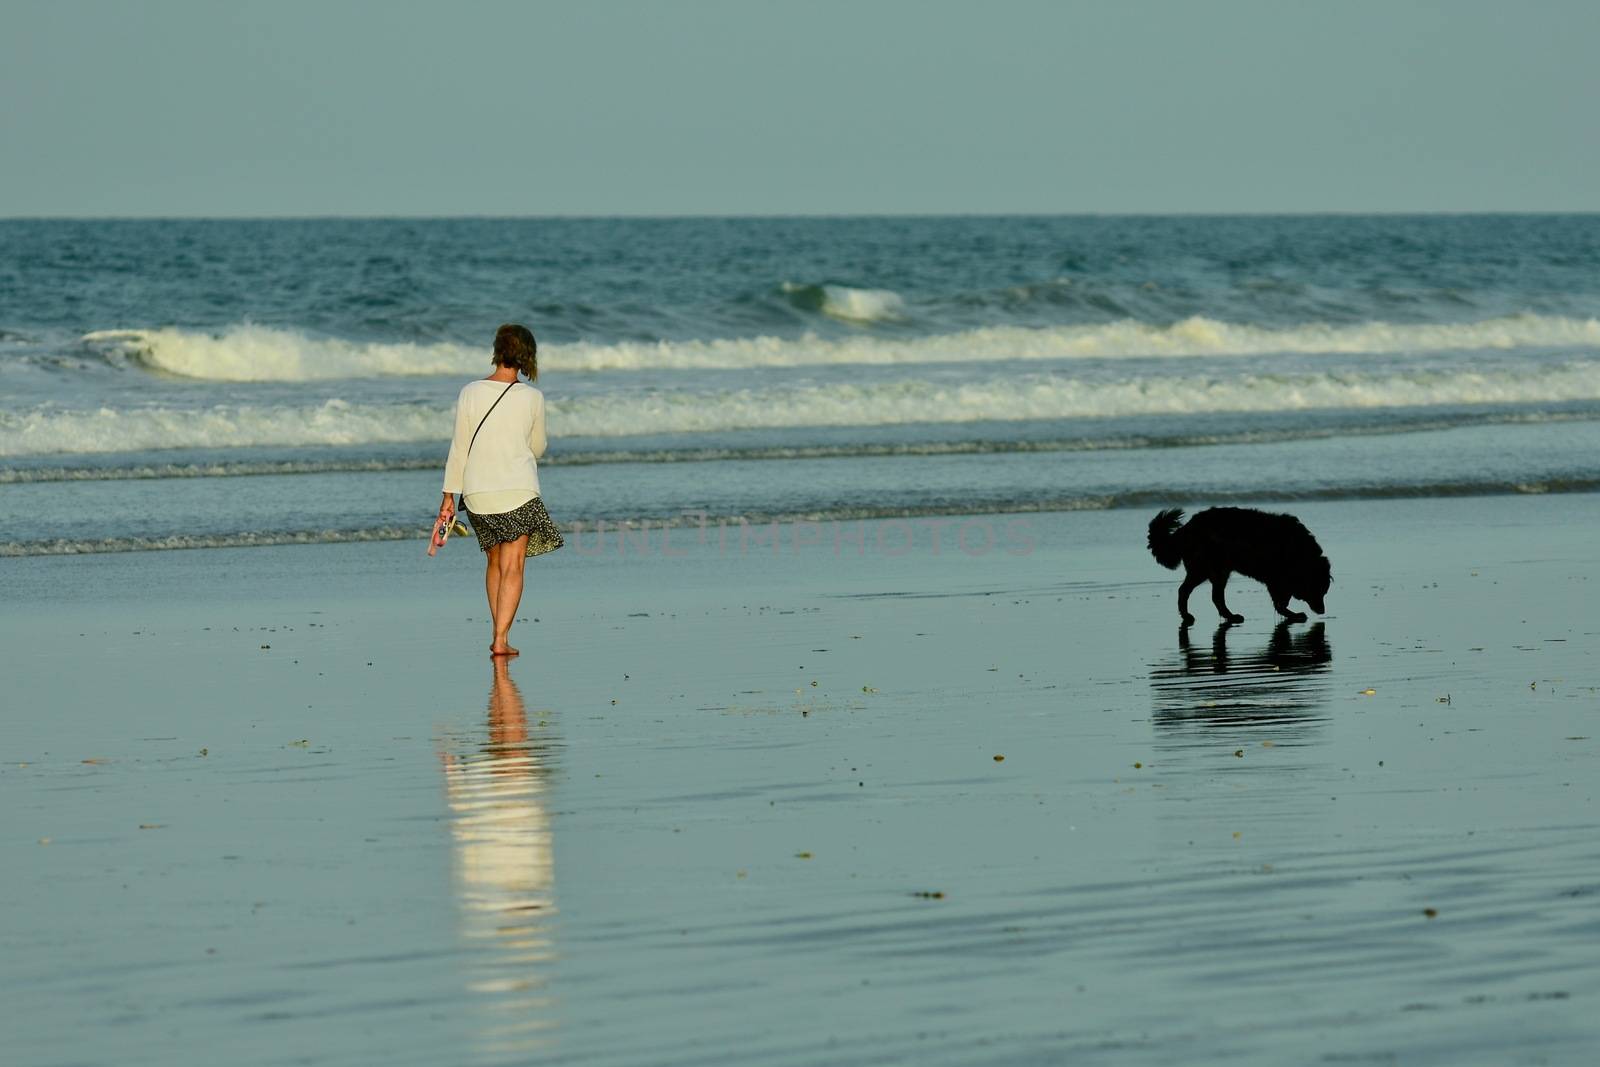 Auckland, New Zealand - Mar 2020. An unidentified young woman enjoying a walk on the beach, with her dog exploring the beach. by Marshalkina